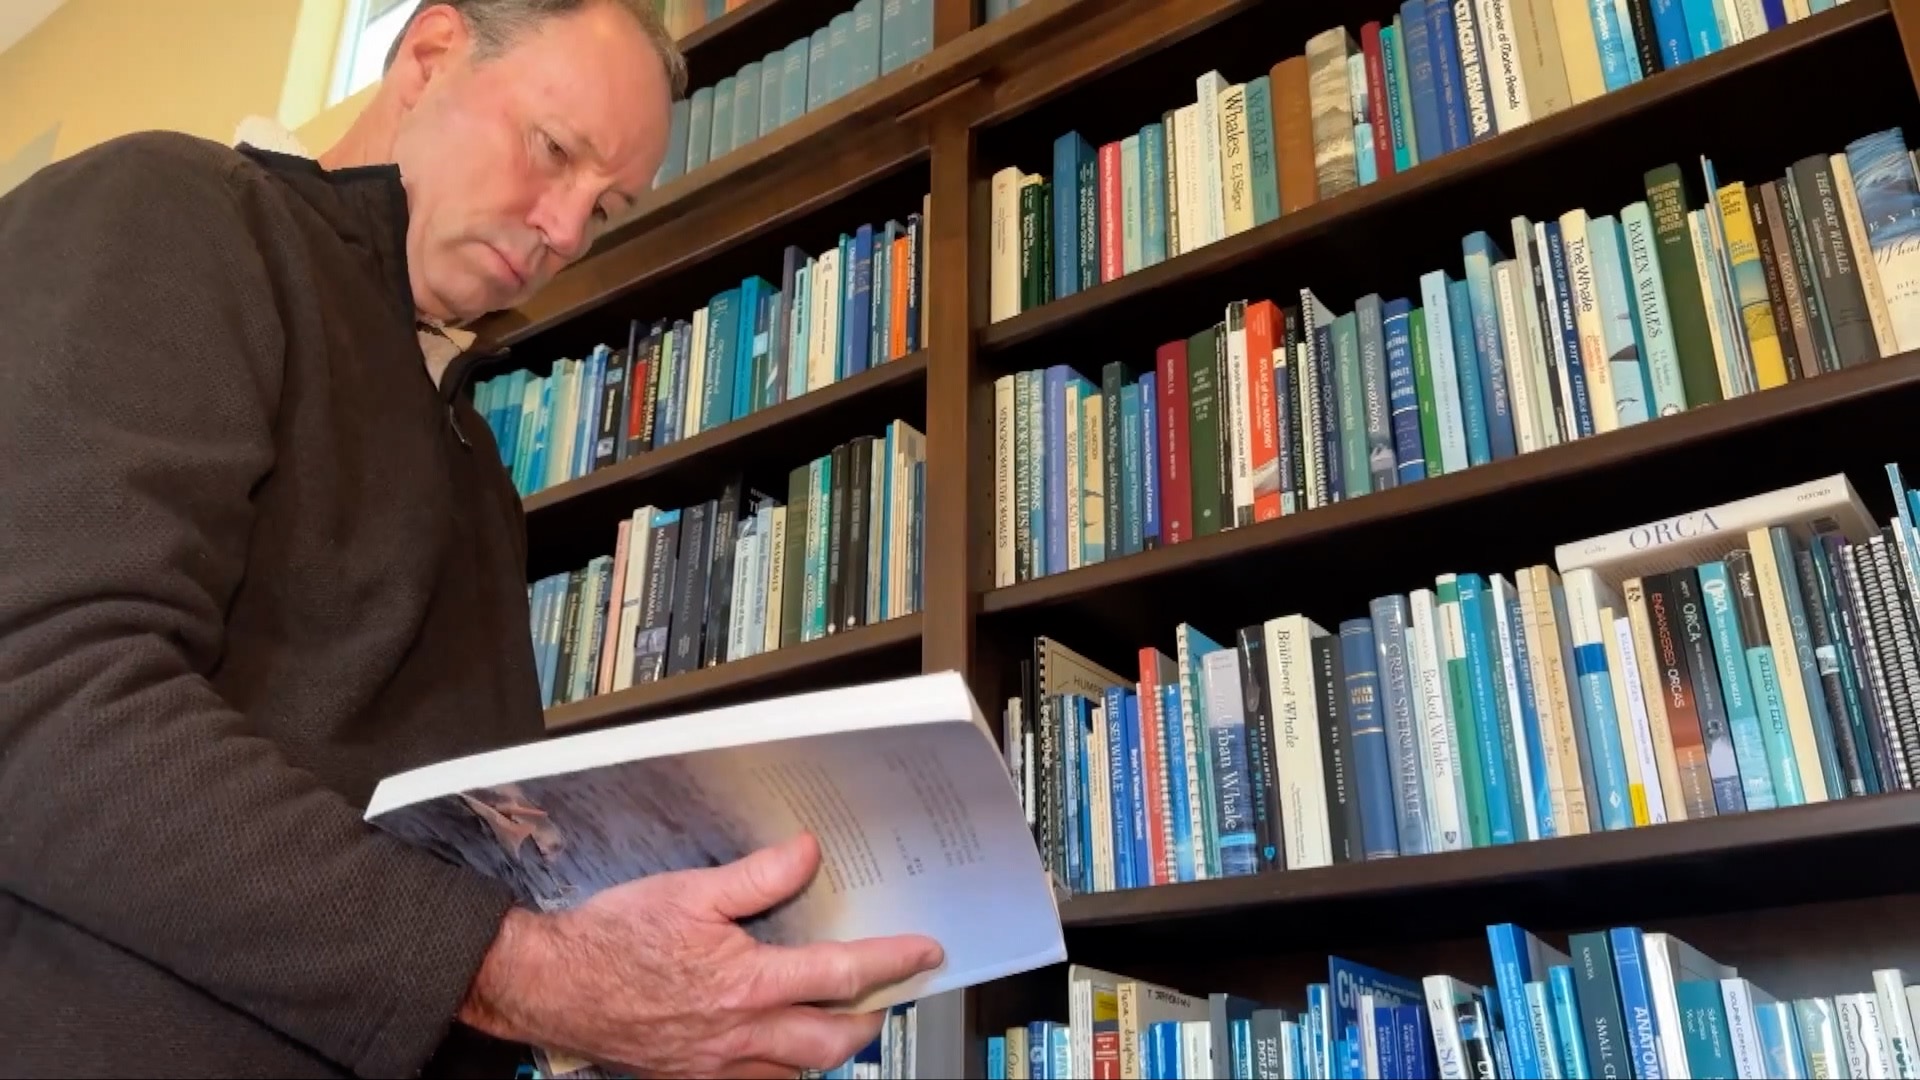 Thomas Jefferson, a visiting scientist from the Southwest Fisheries Science Center, browses through a book on Chinese white dolphins in California, the United States. /CGTN video screenshot